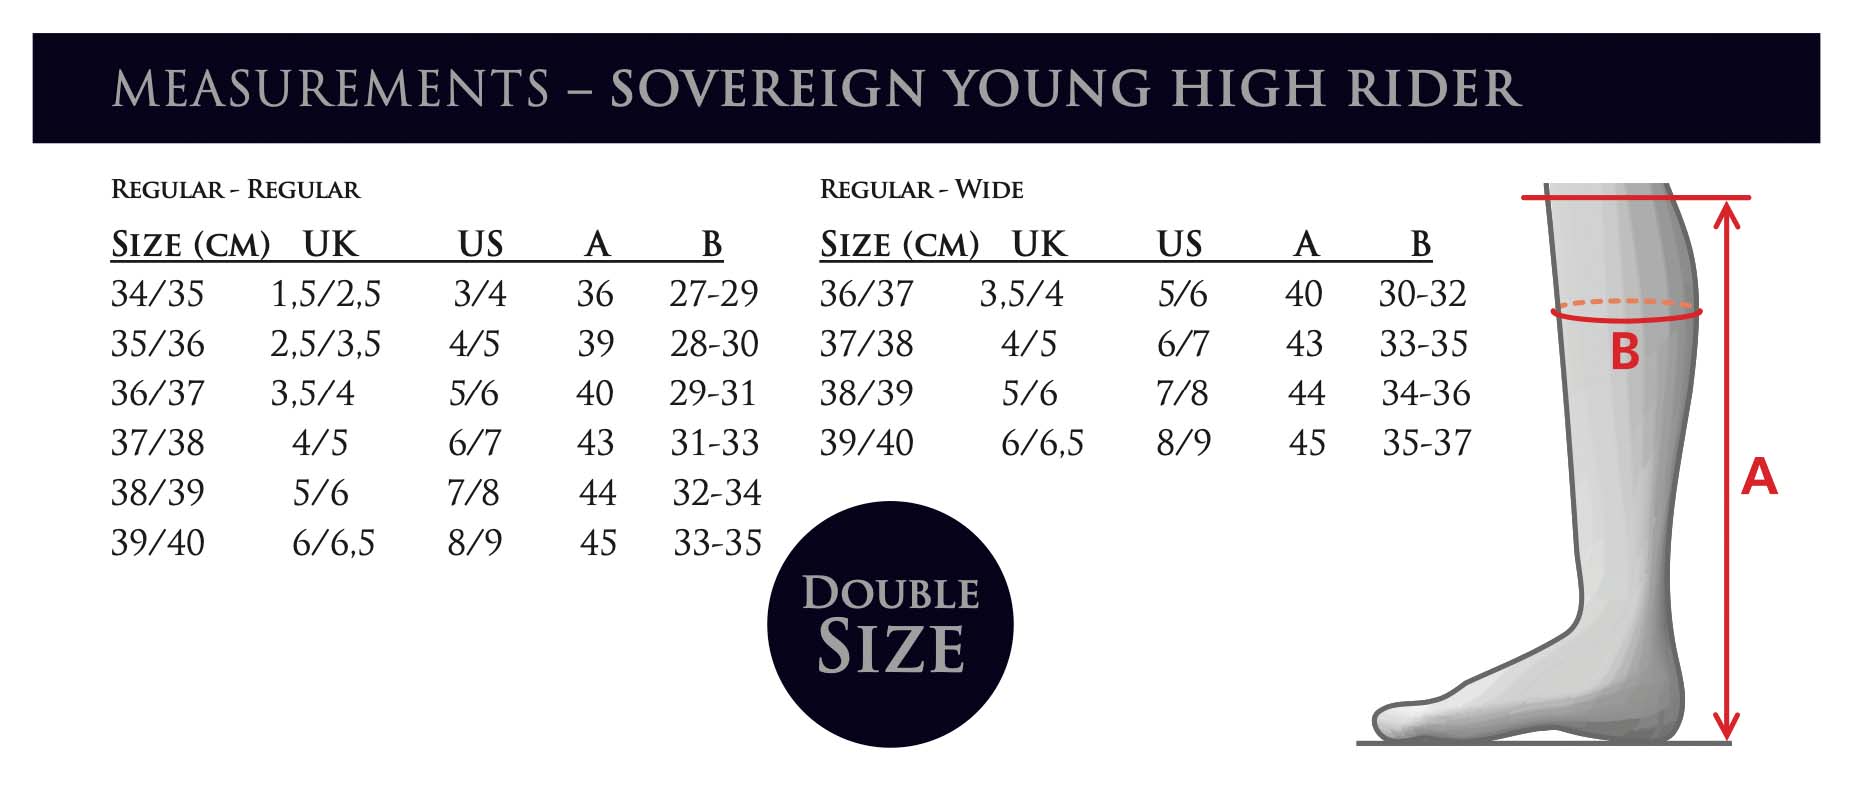 Tabelle-Sovereign-Young